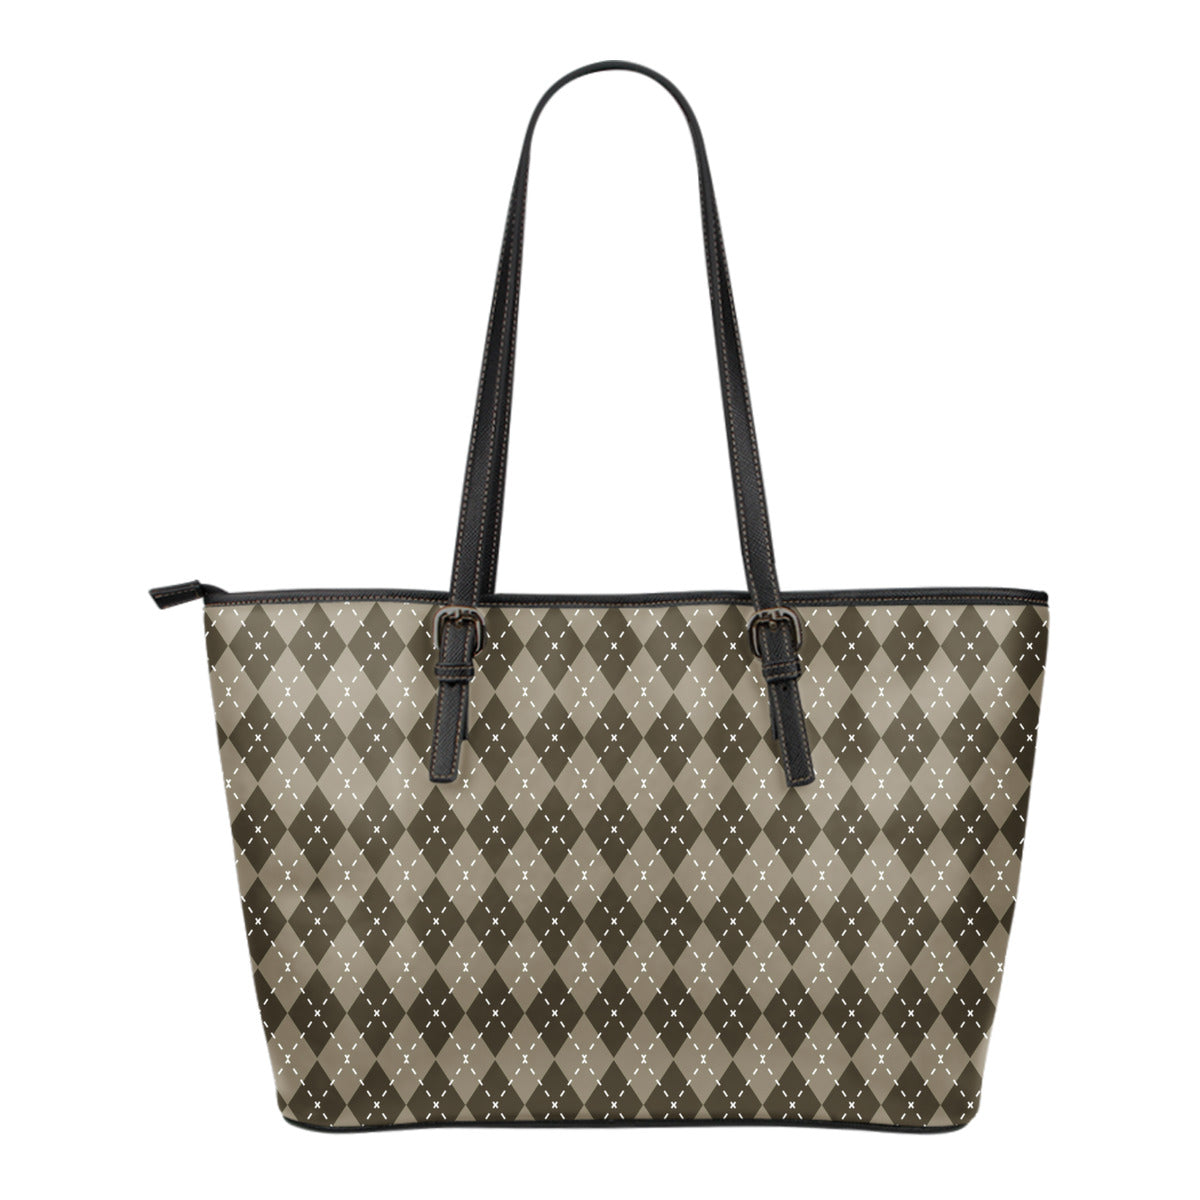 Chocolate Argyle Small Leather Tote Bag